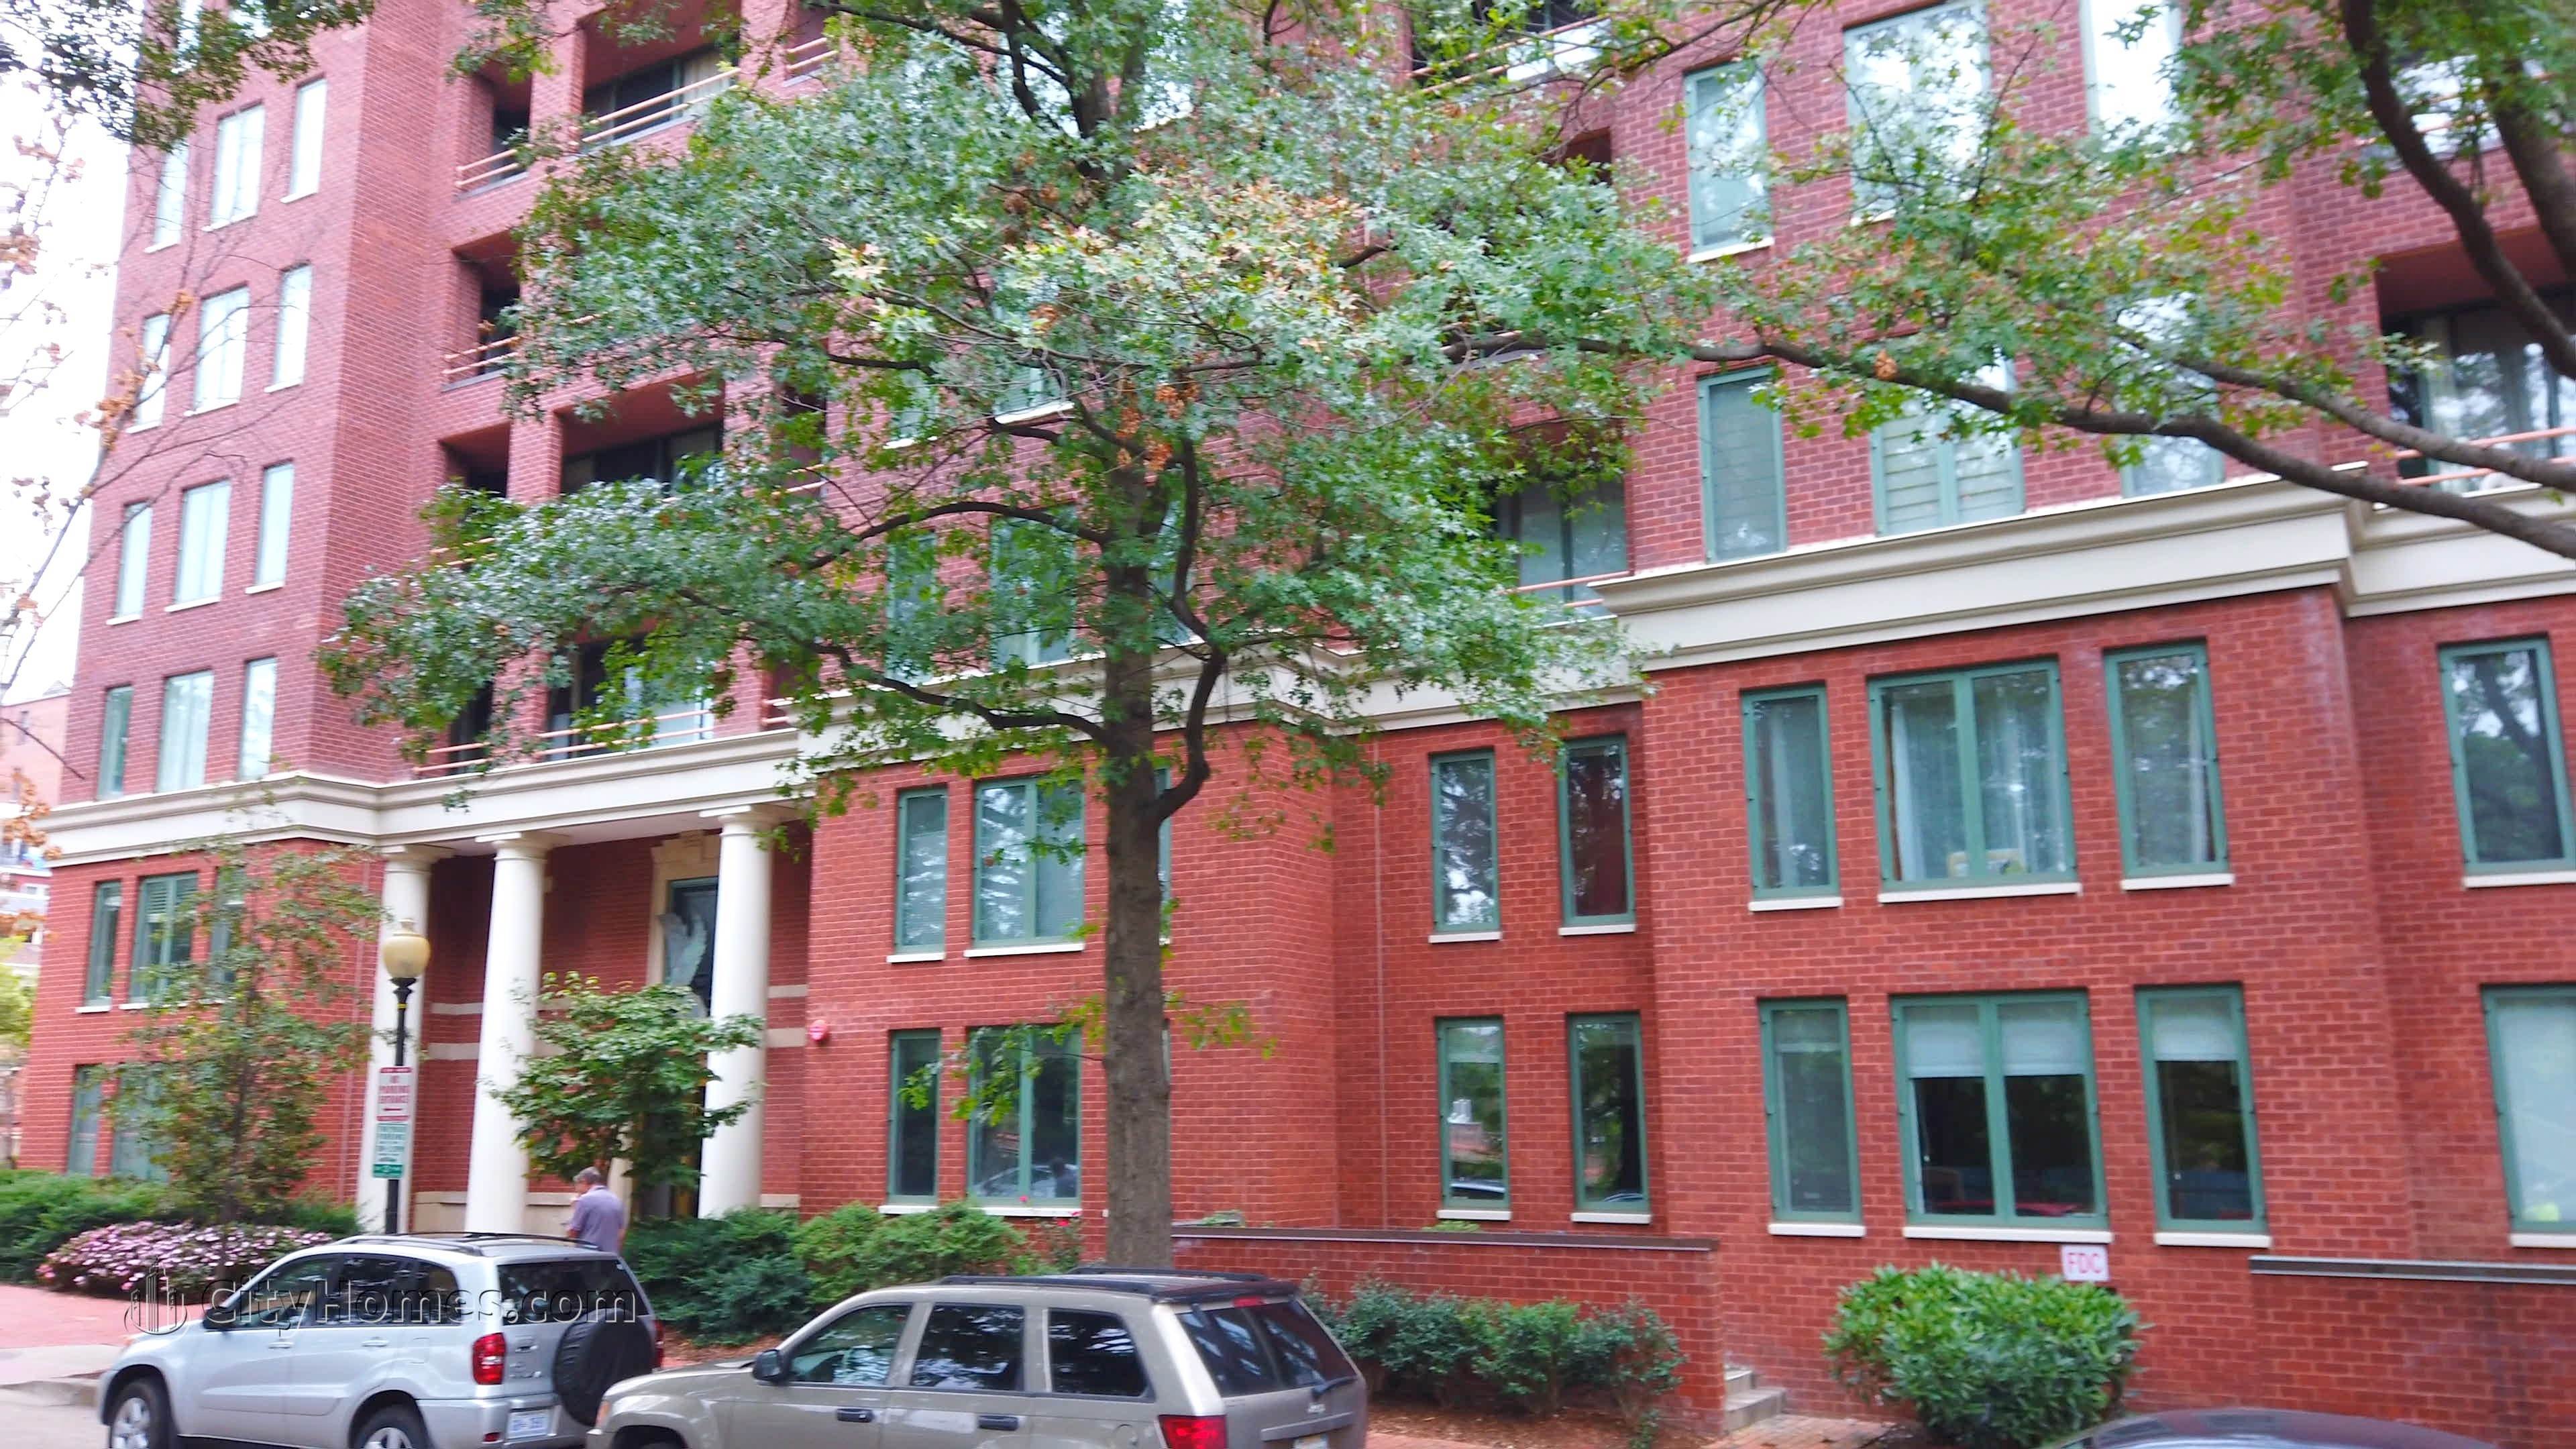 4. The Griffin building at 955 26th St NW, Foggy Bottom, Washington, DC 20037